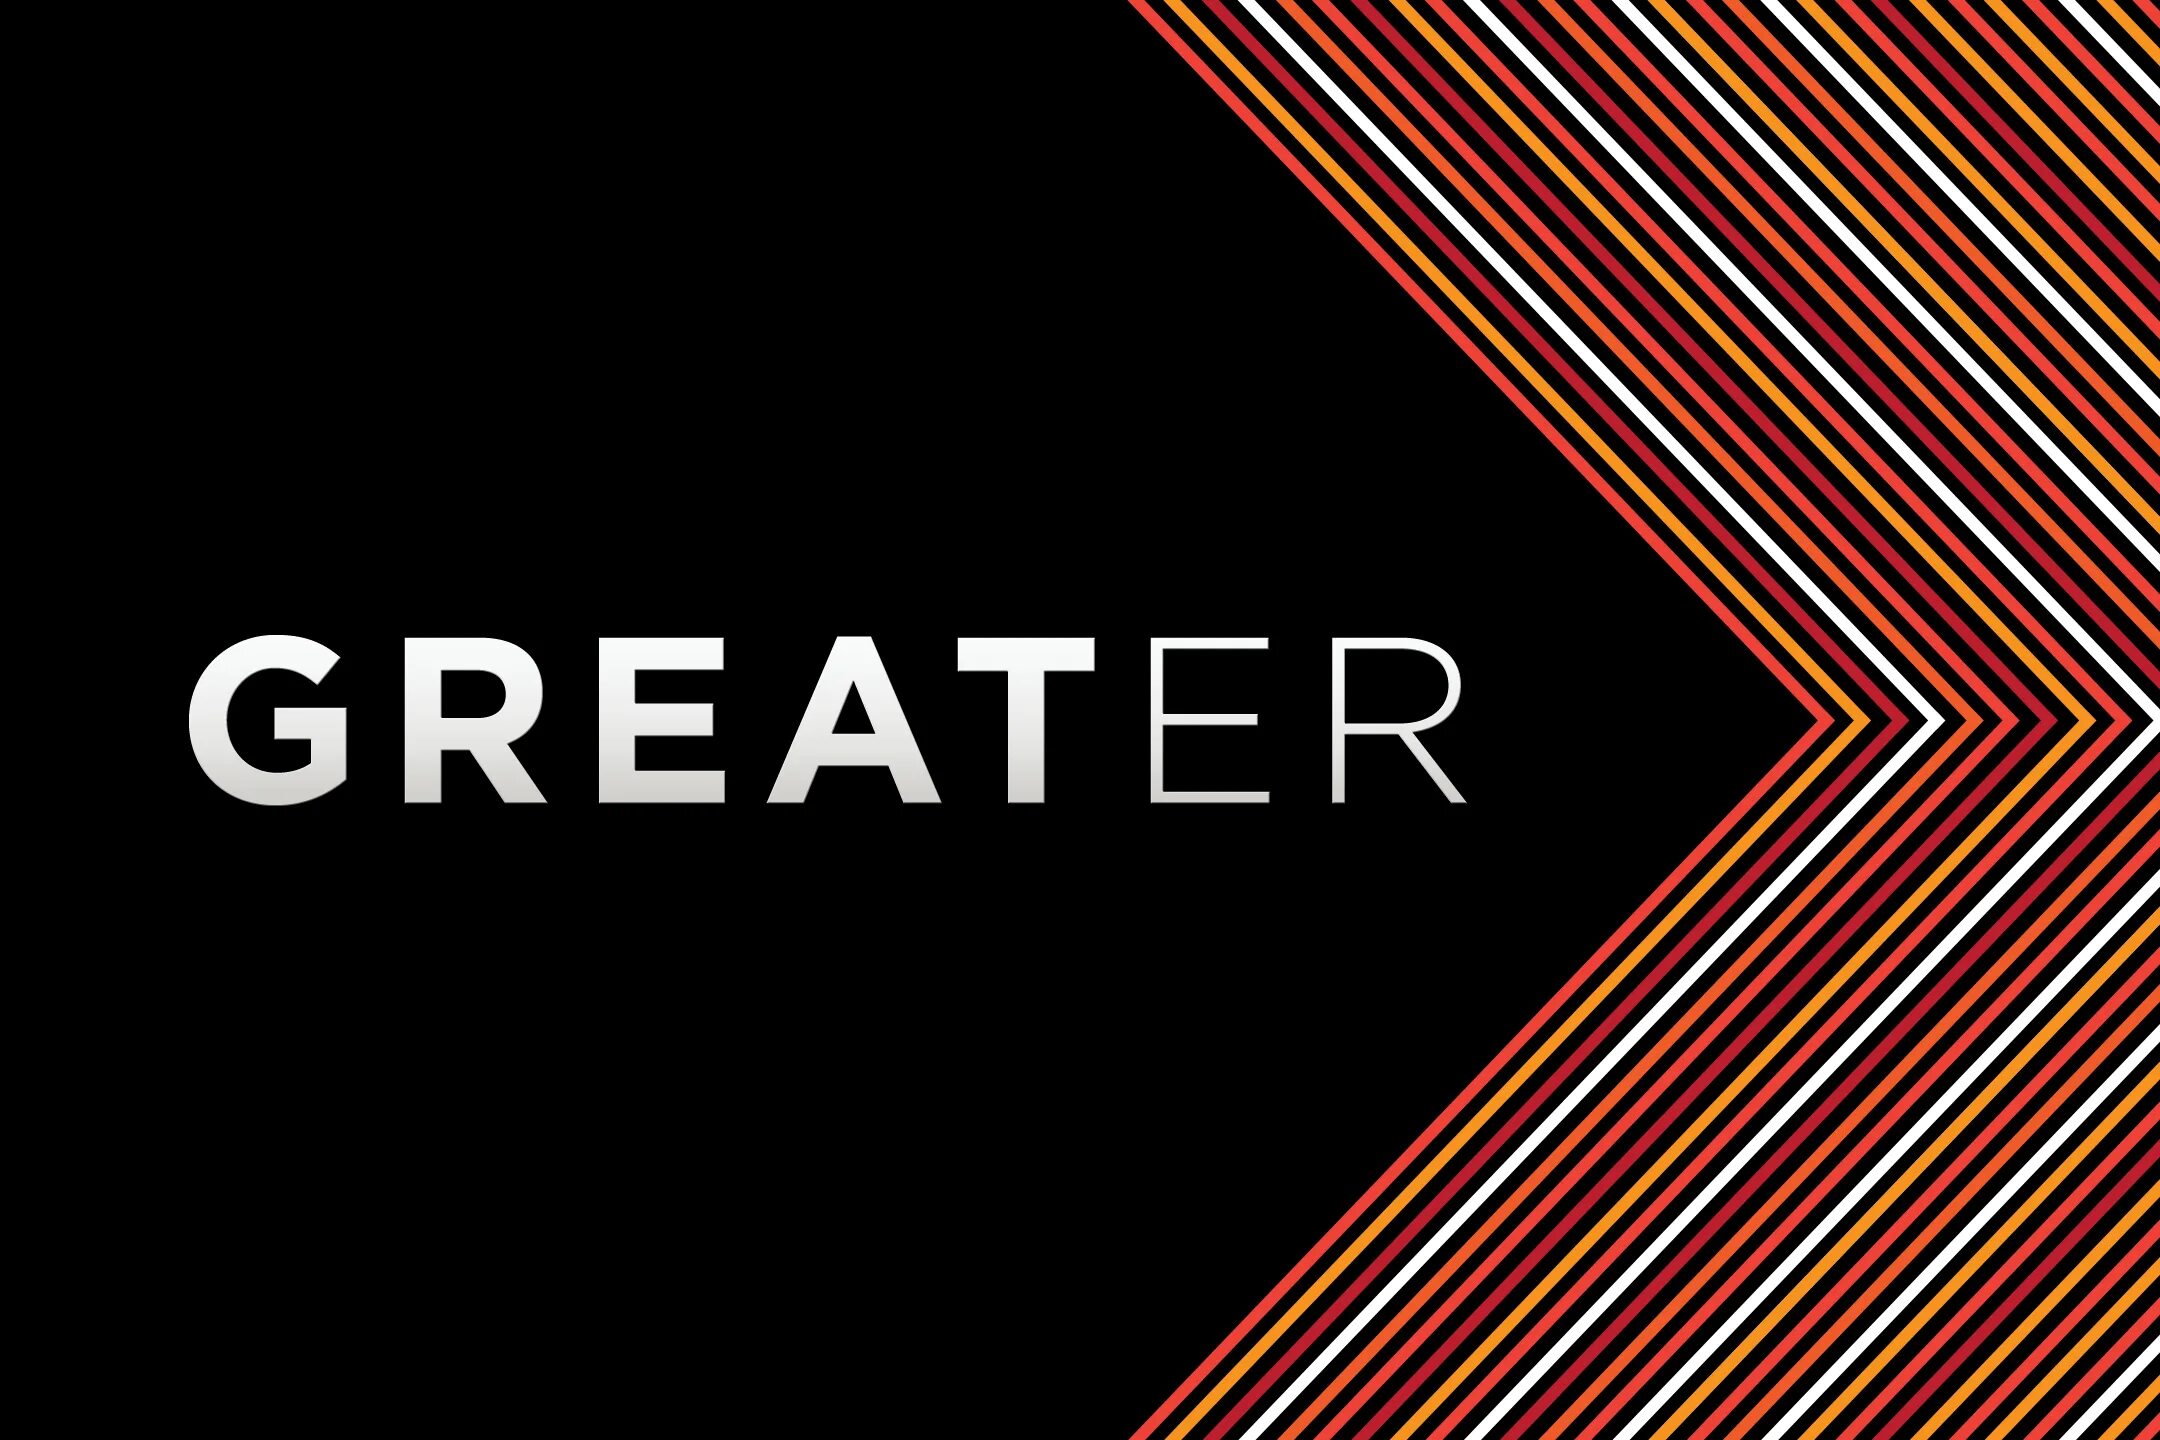 Greater. Be Greater.